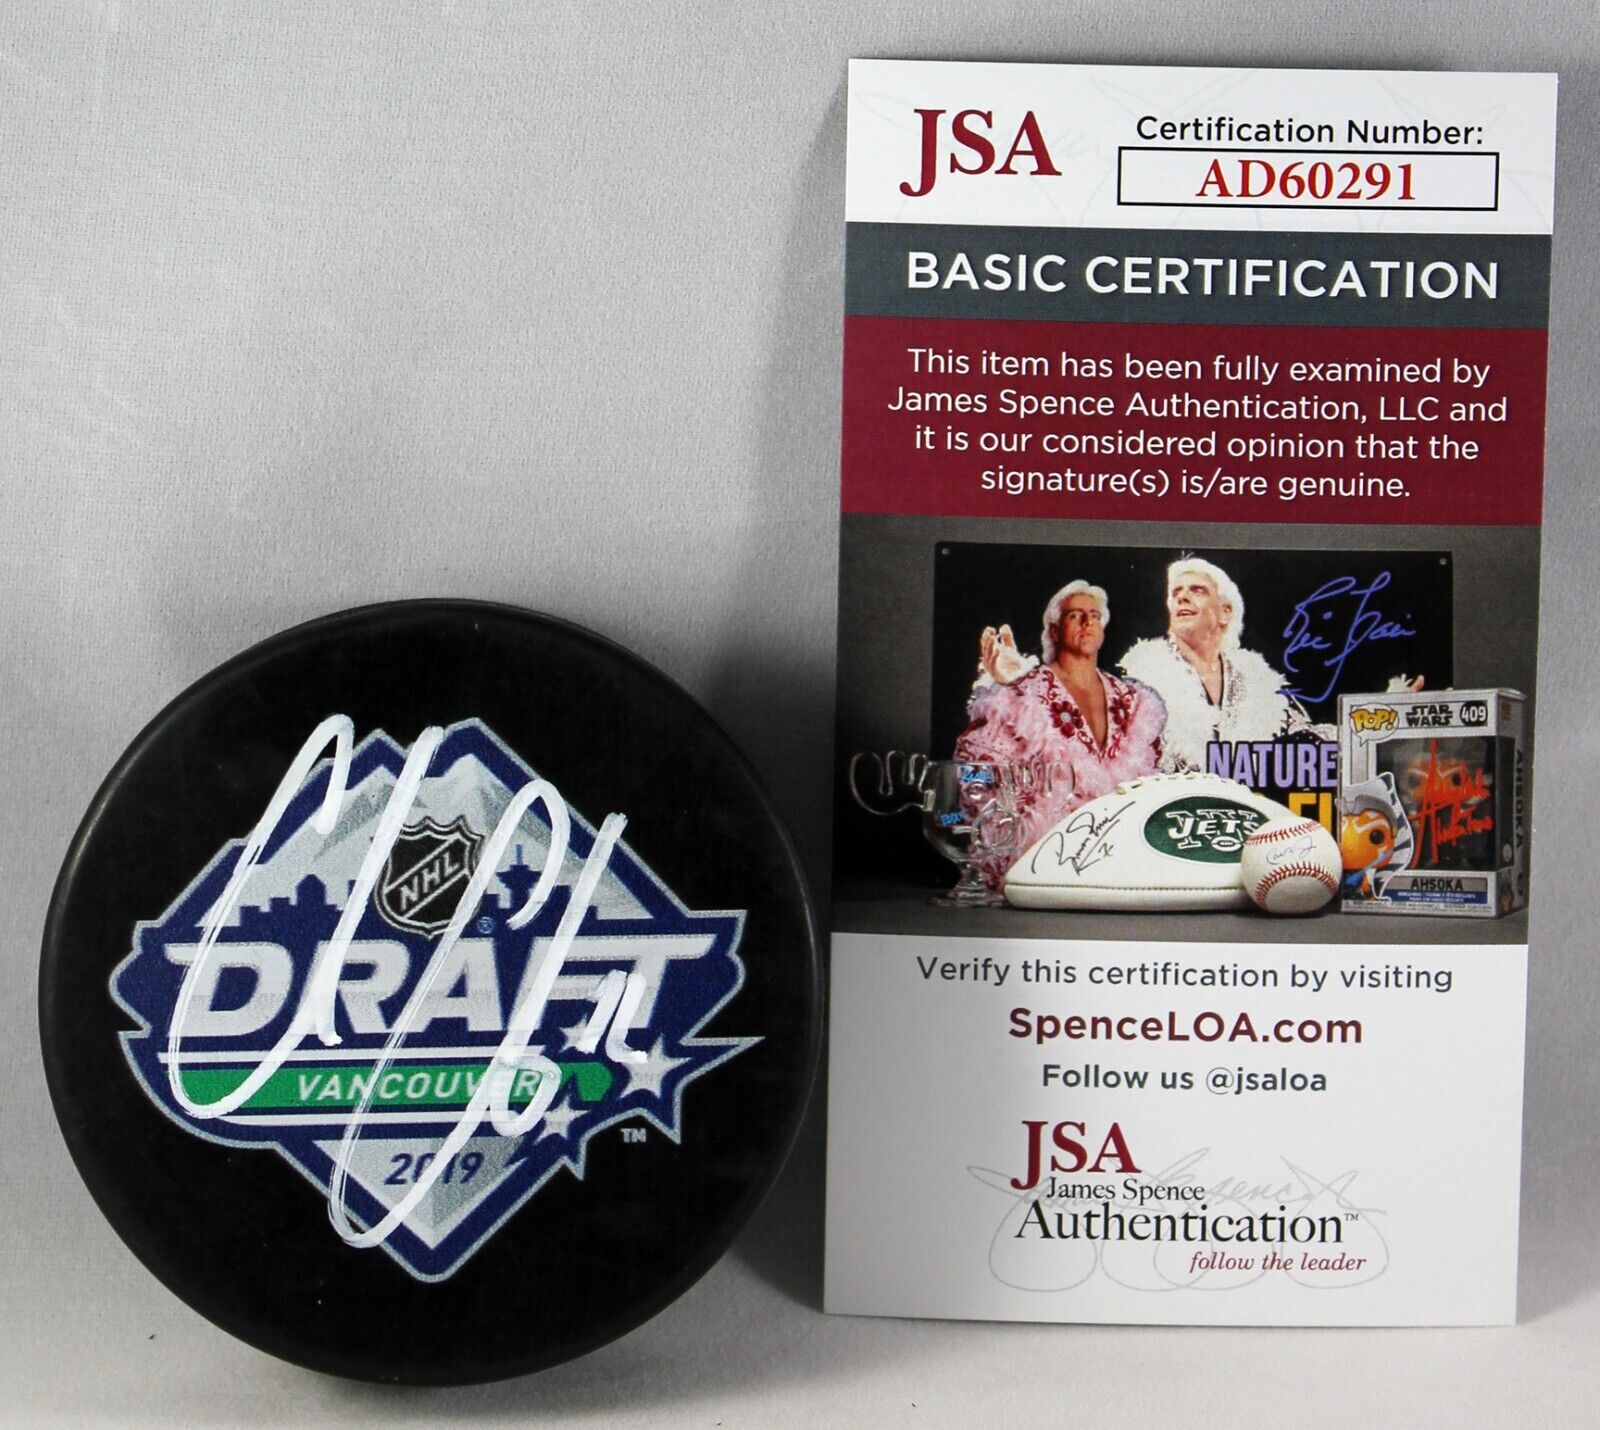 COLE CAUFIELD SIGNED 2019 NHL DRAFT PUCK MONTREAL CANADIENS AUTOGRAPHED +JSA COA